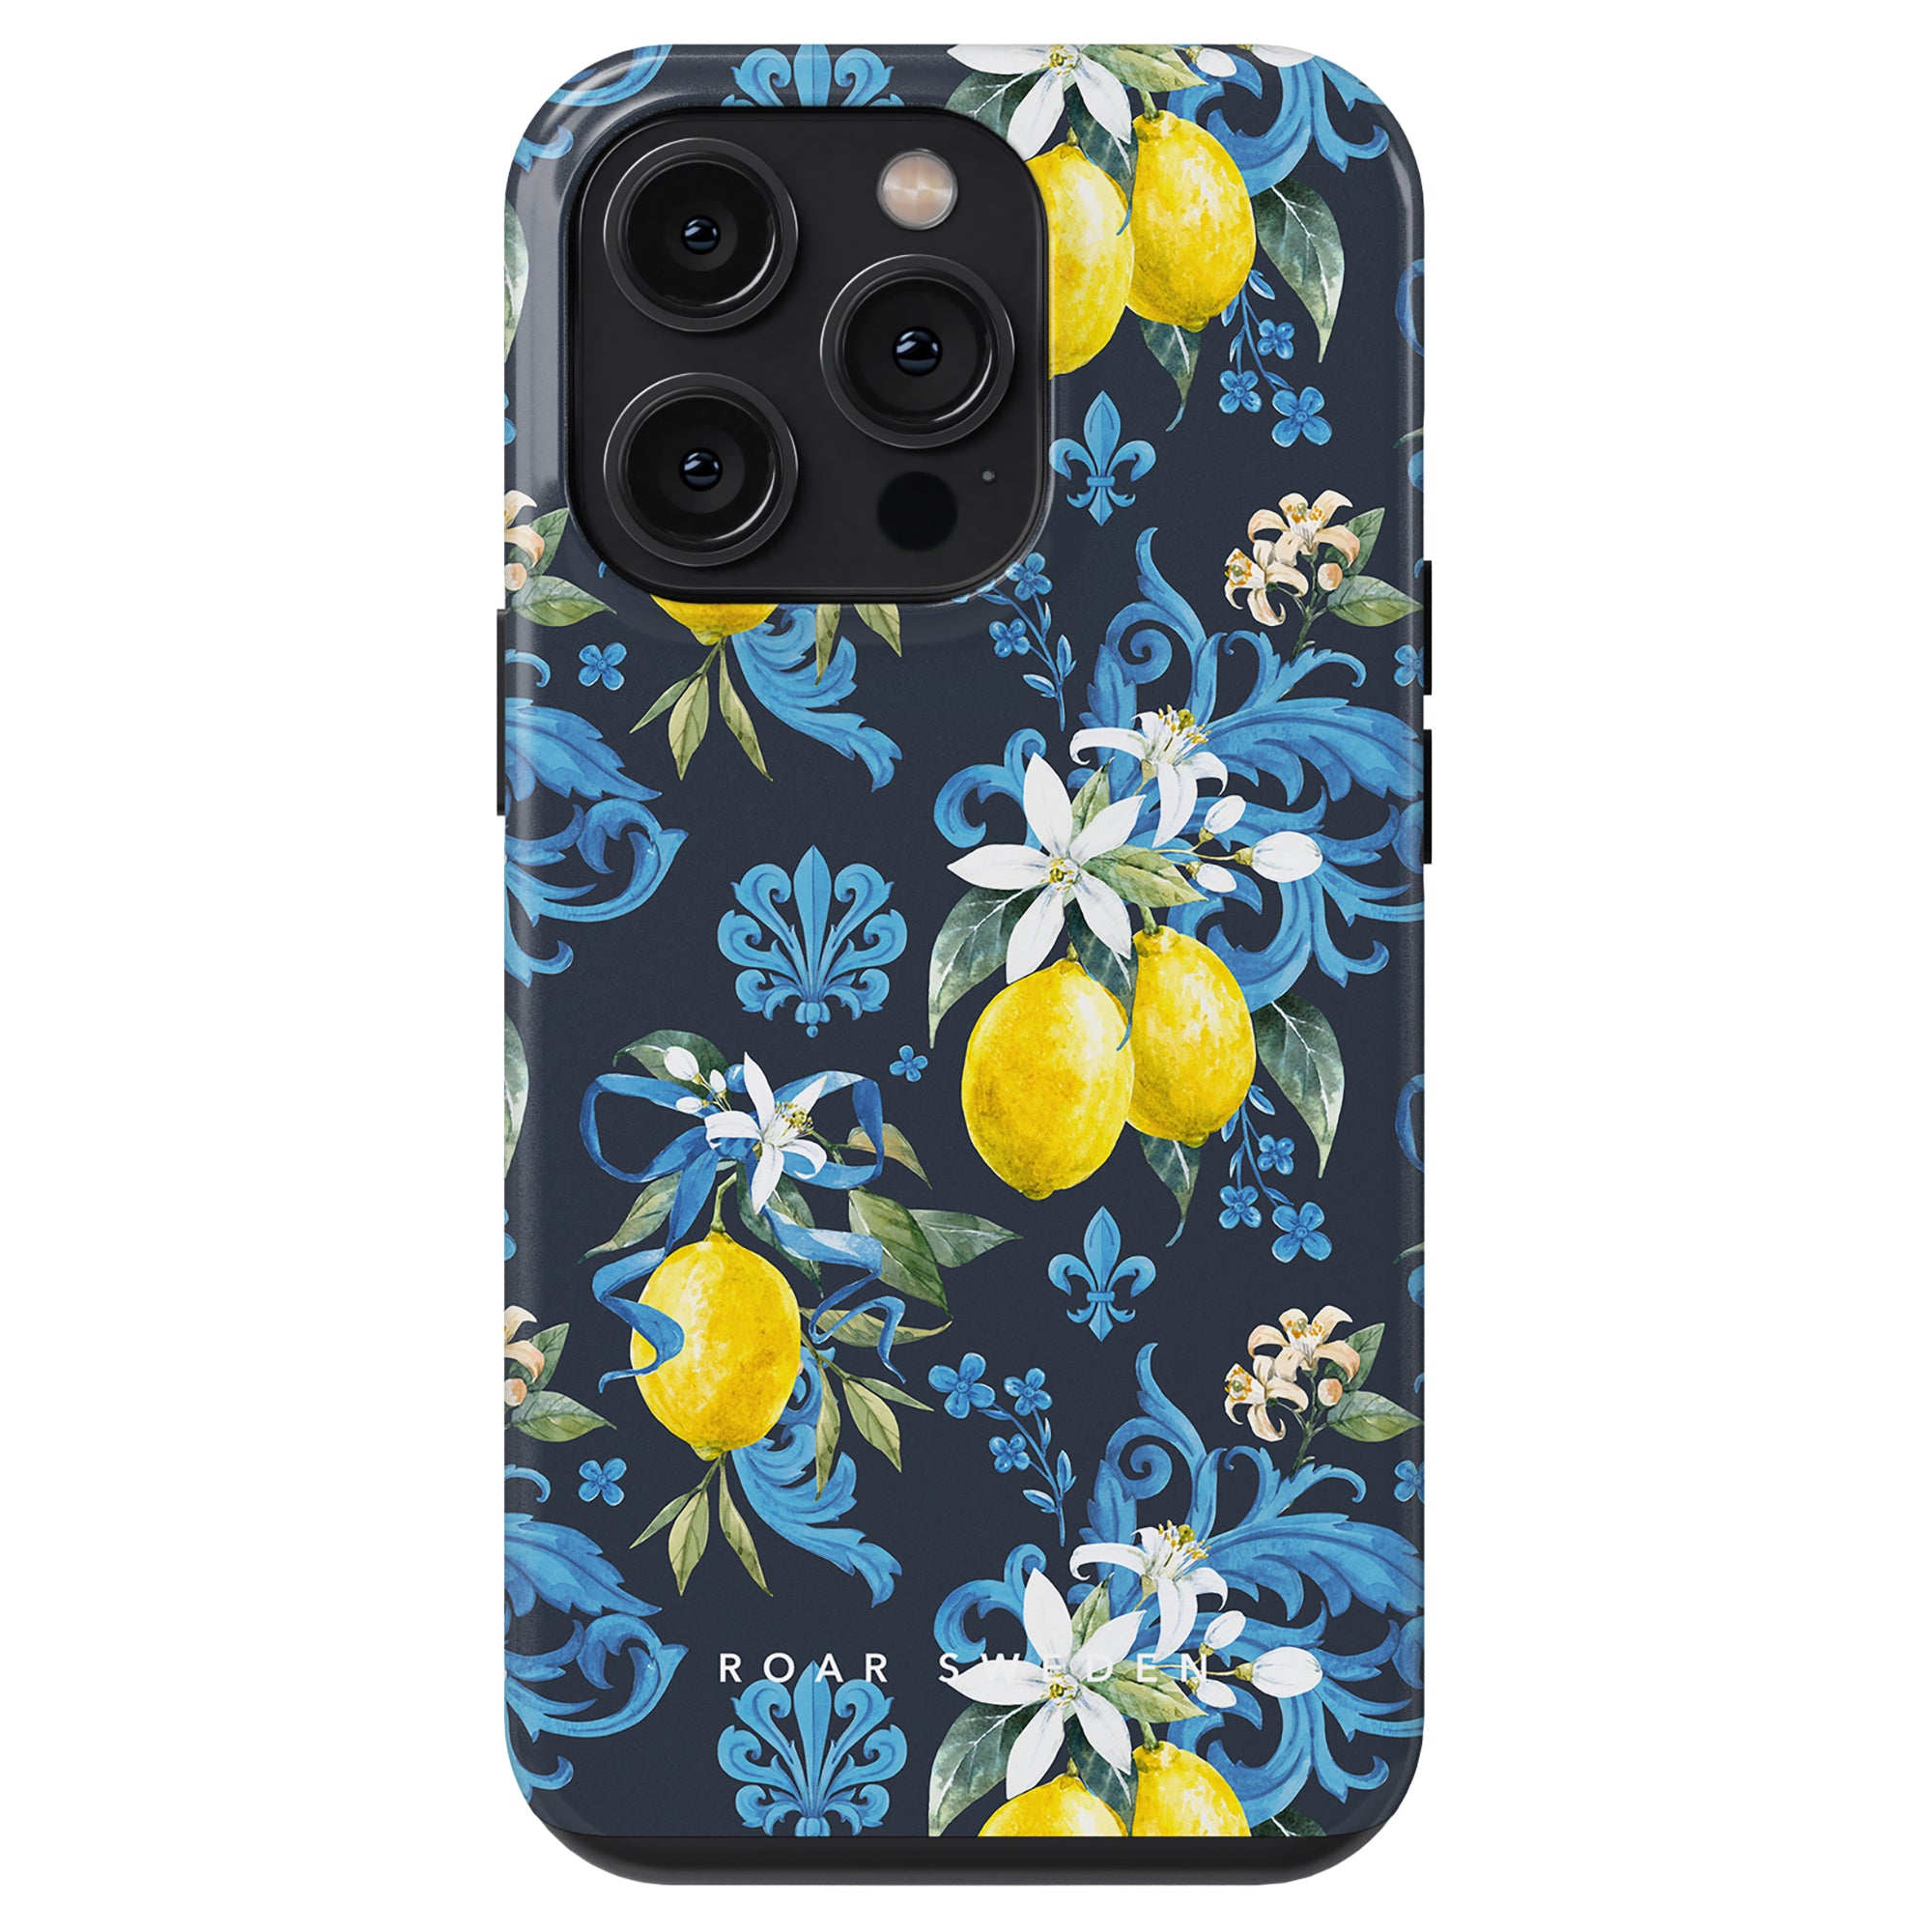 Toscana - Tough case with a Sicilianska lemon and floral pattern on a blue background, designed for a model with triple rear cameras.